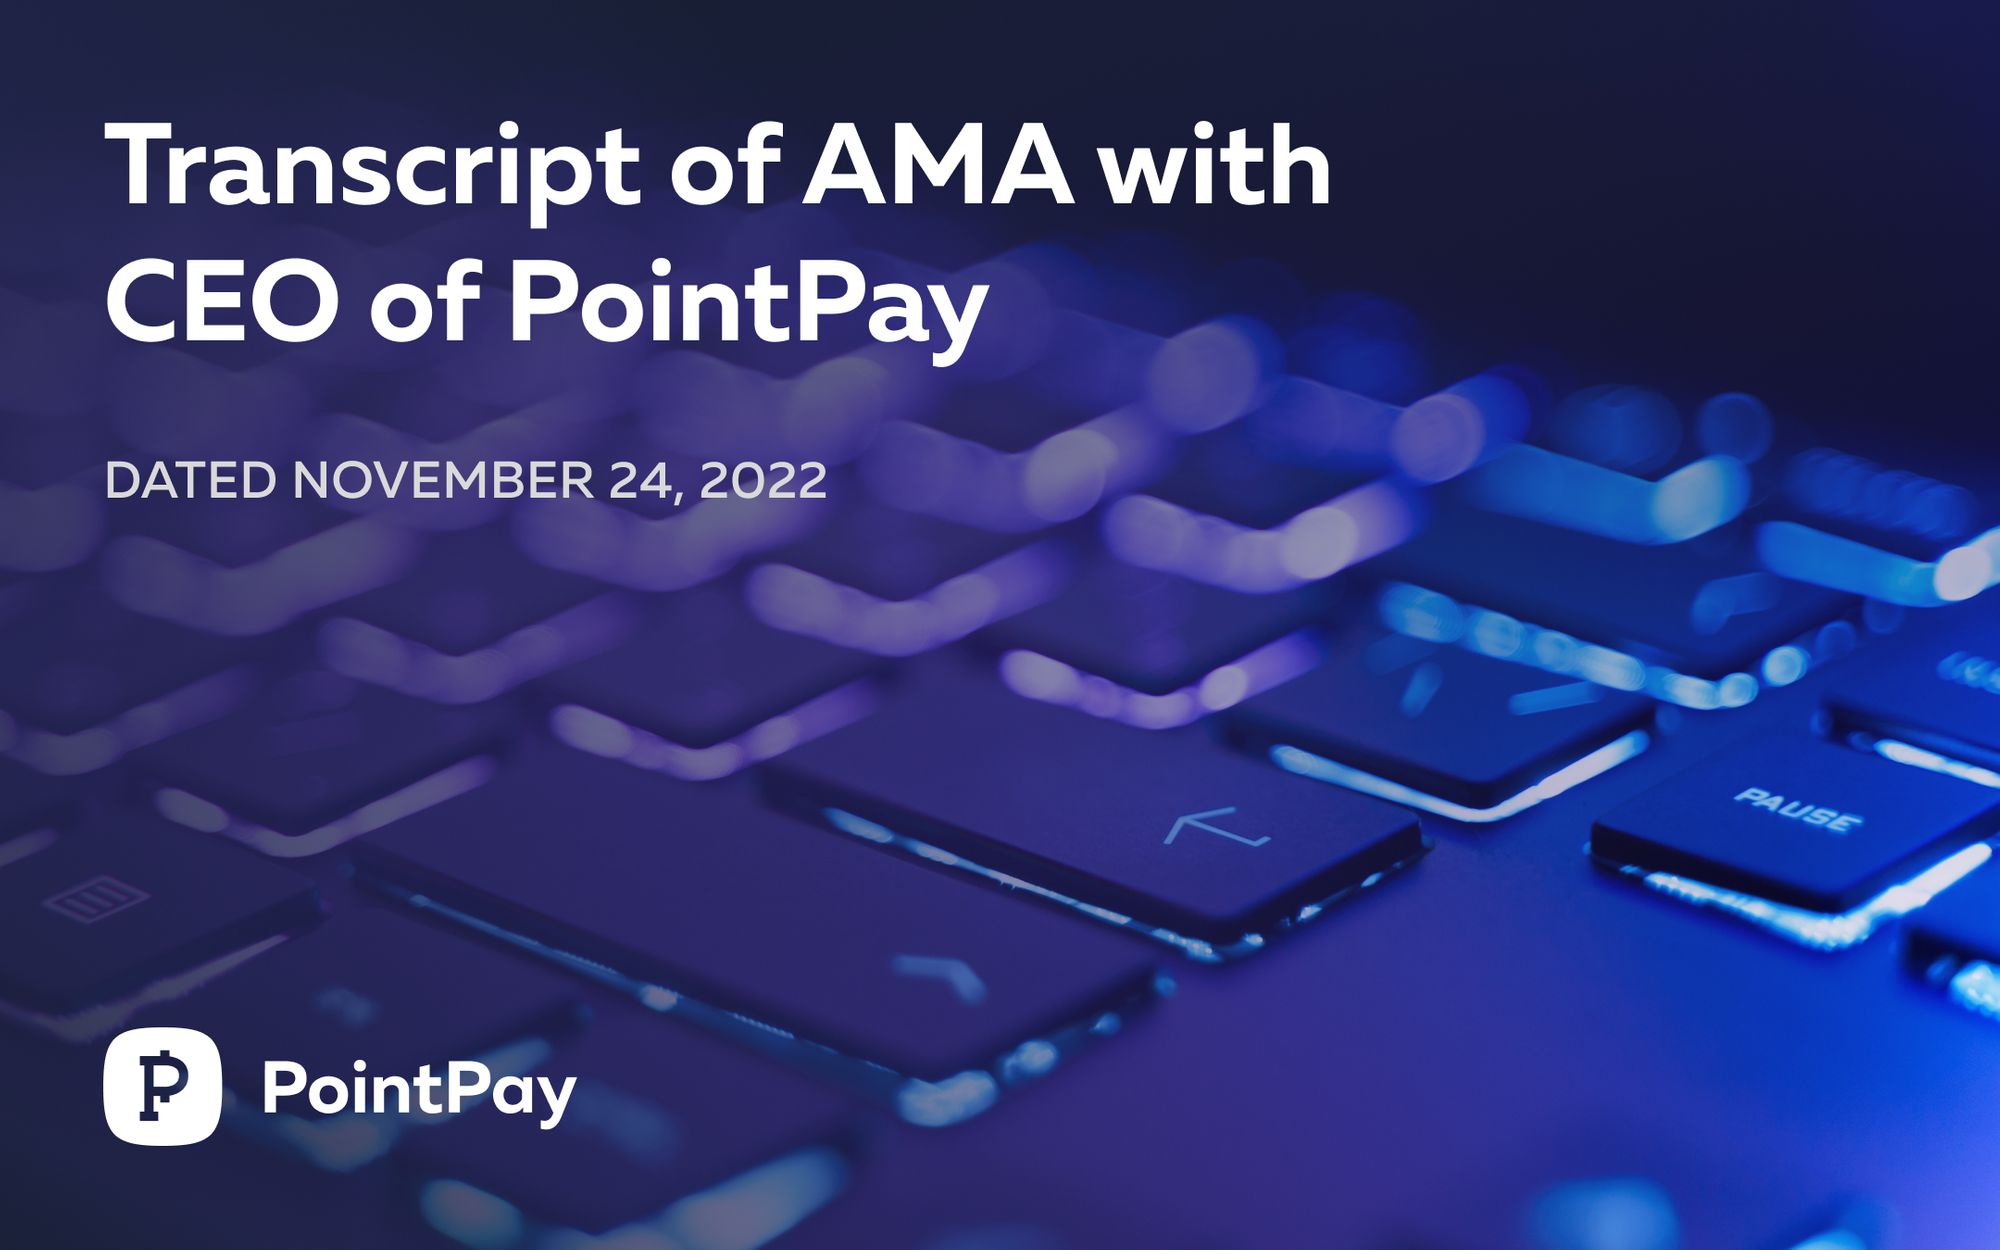 Transcript of AMA with CEO of PointPay – Vladimir (CEO) Kardapoltsev